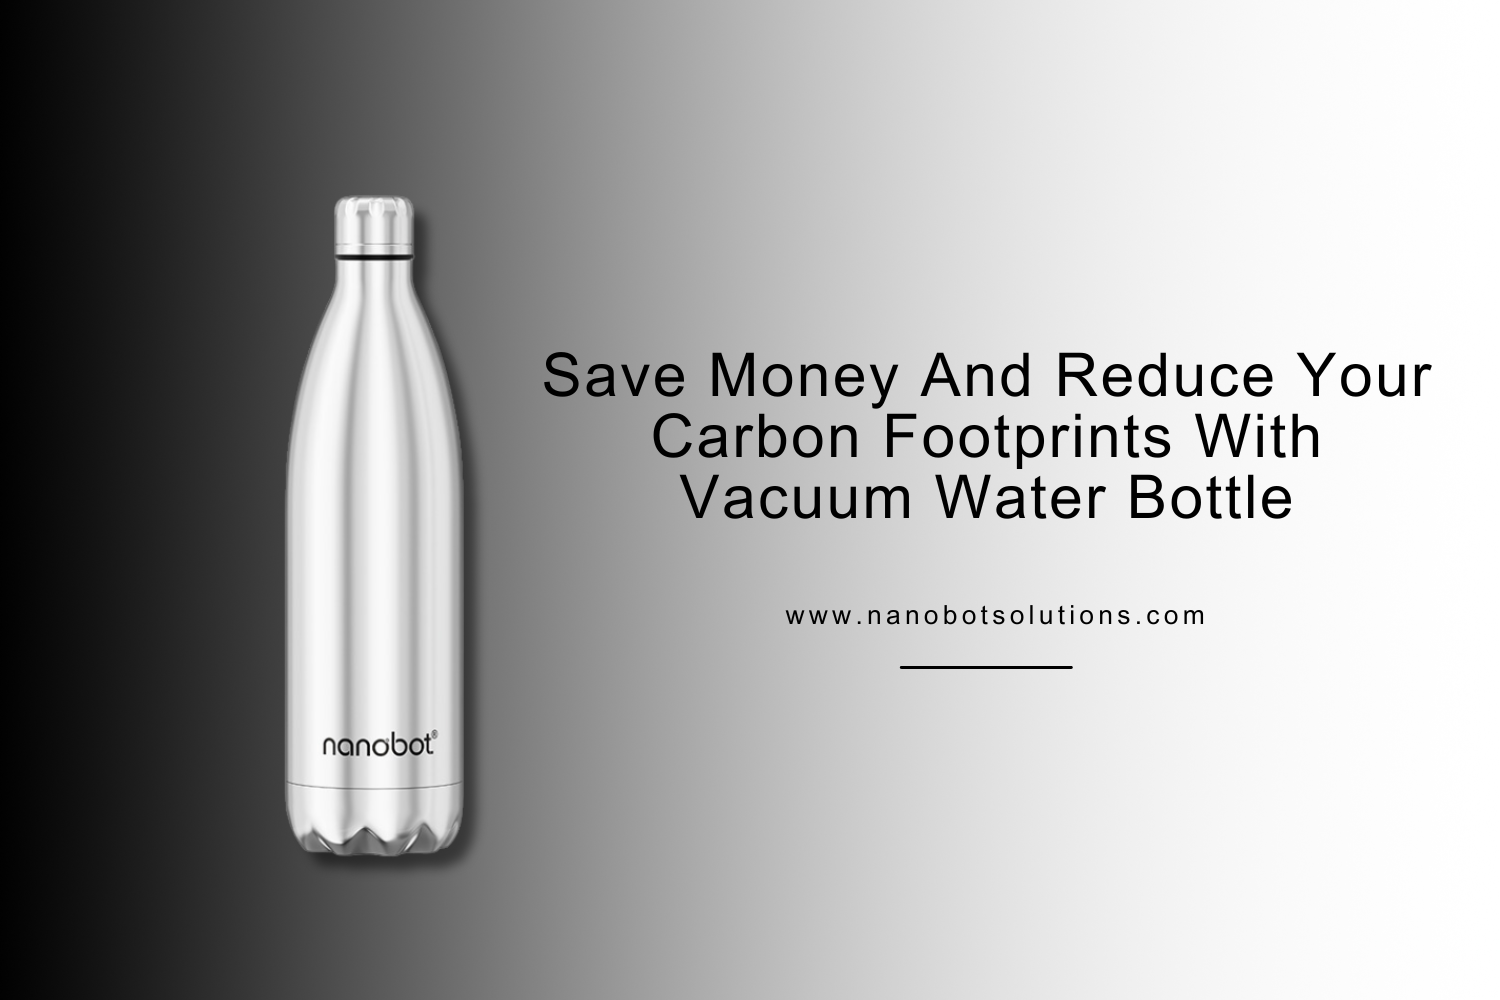 Save Money and Reduce Your Carbon Footprint with Vacuum Water Bottles -Nanobot